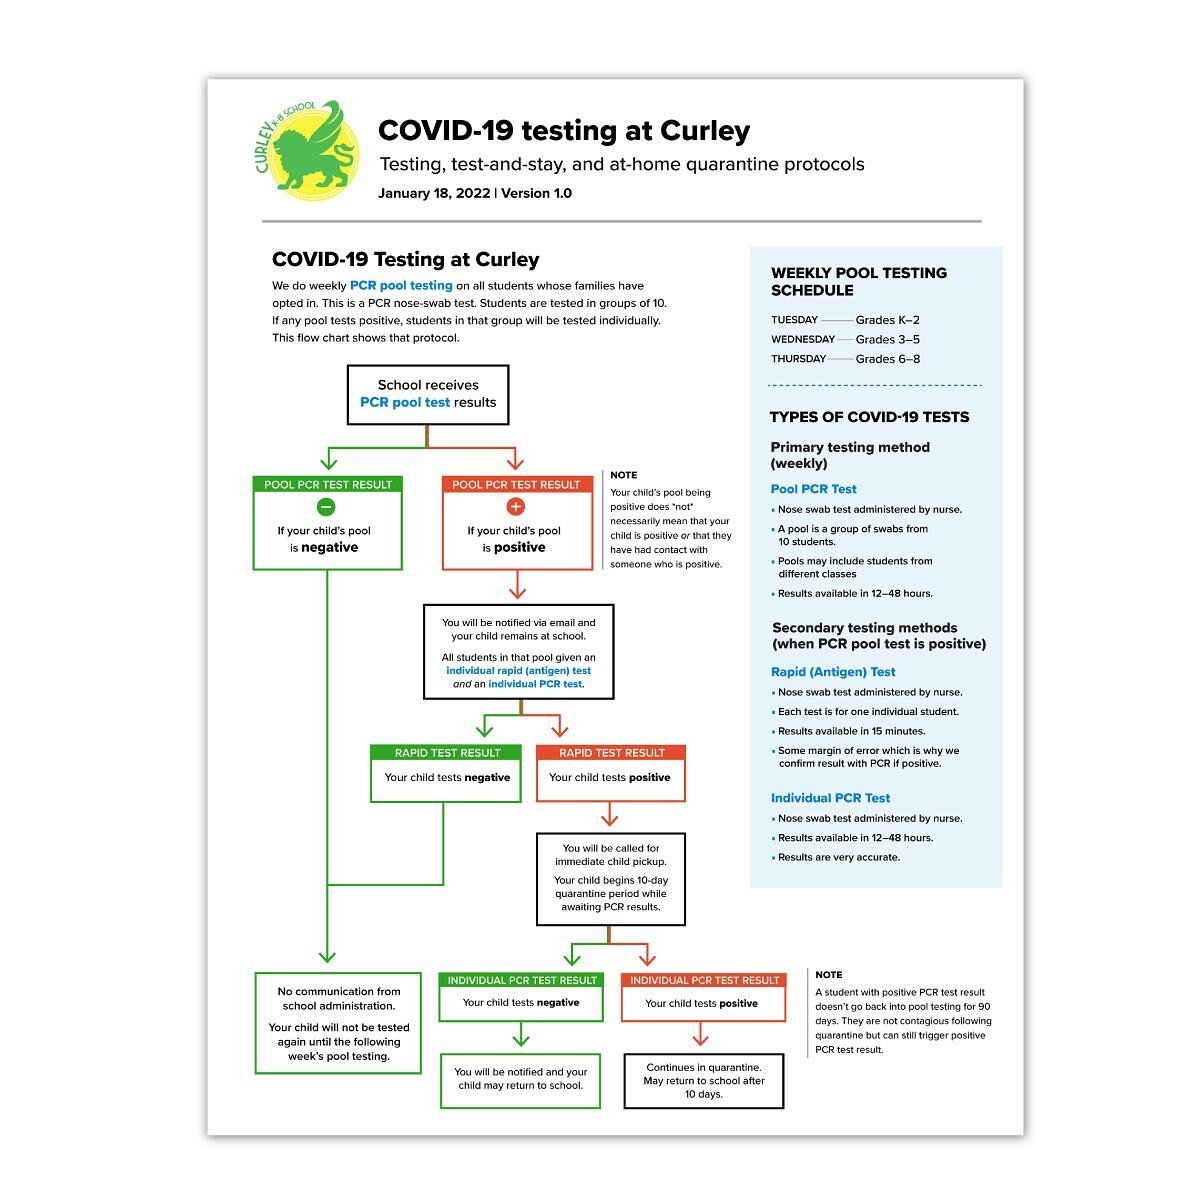 ☑️ Clearly communicate your COVID testing protocol using this customizable flow chart!

📋🖌We created this editable flow chart for schools to use to communicate their COVID-19 testing protocol to families. A long text document of instructions can be